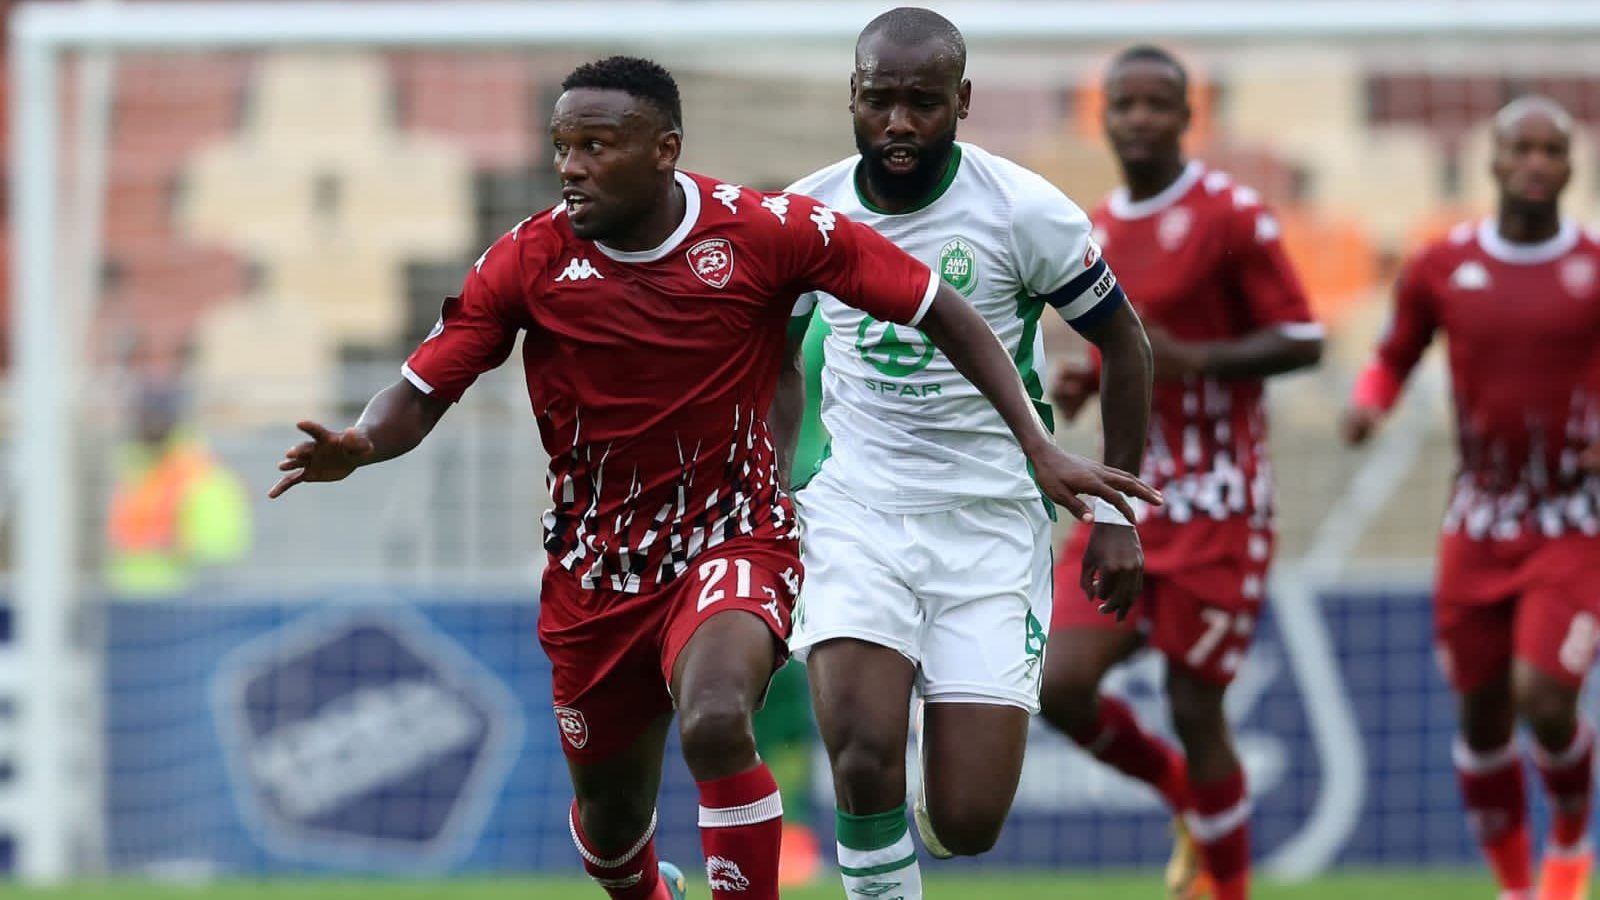 AmaZulu played to a 0-0 draw against Sekhukhune on Saturday